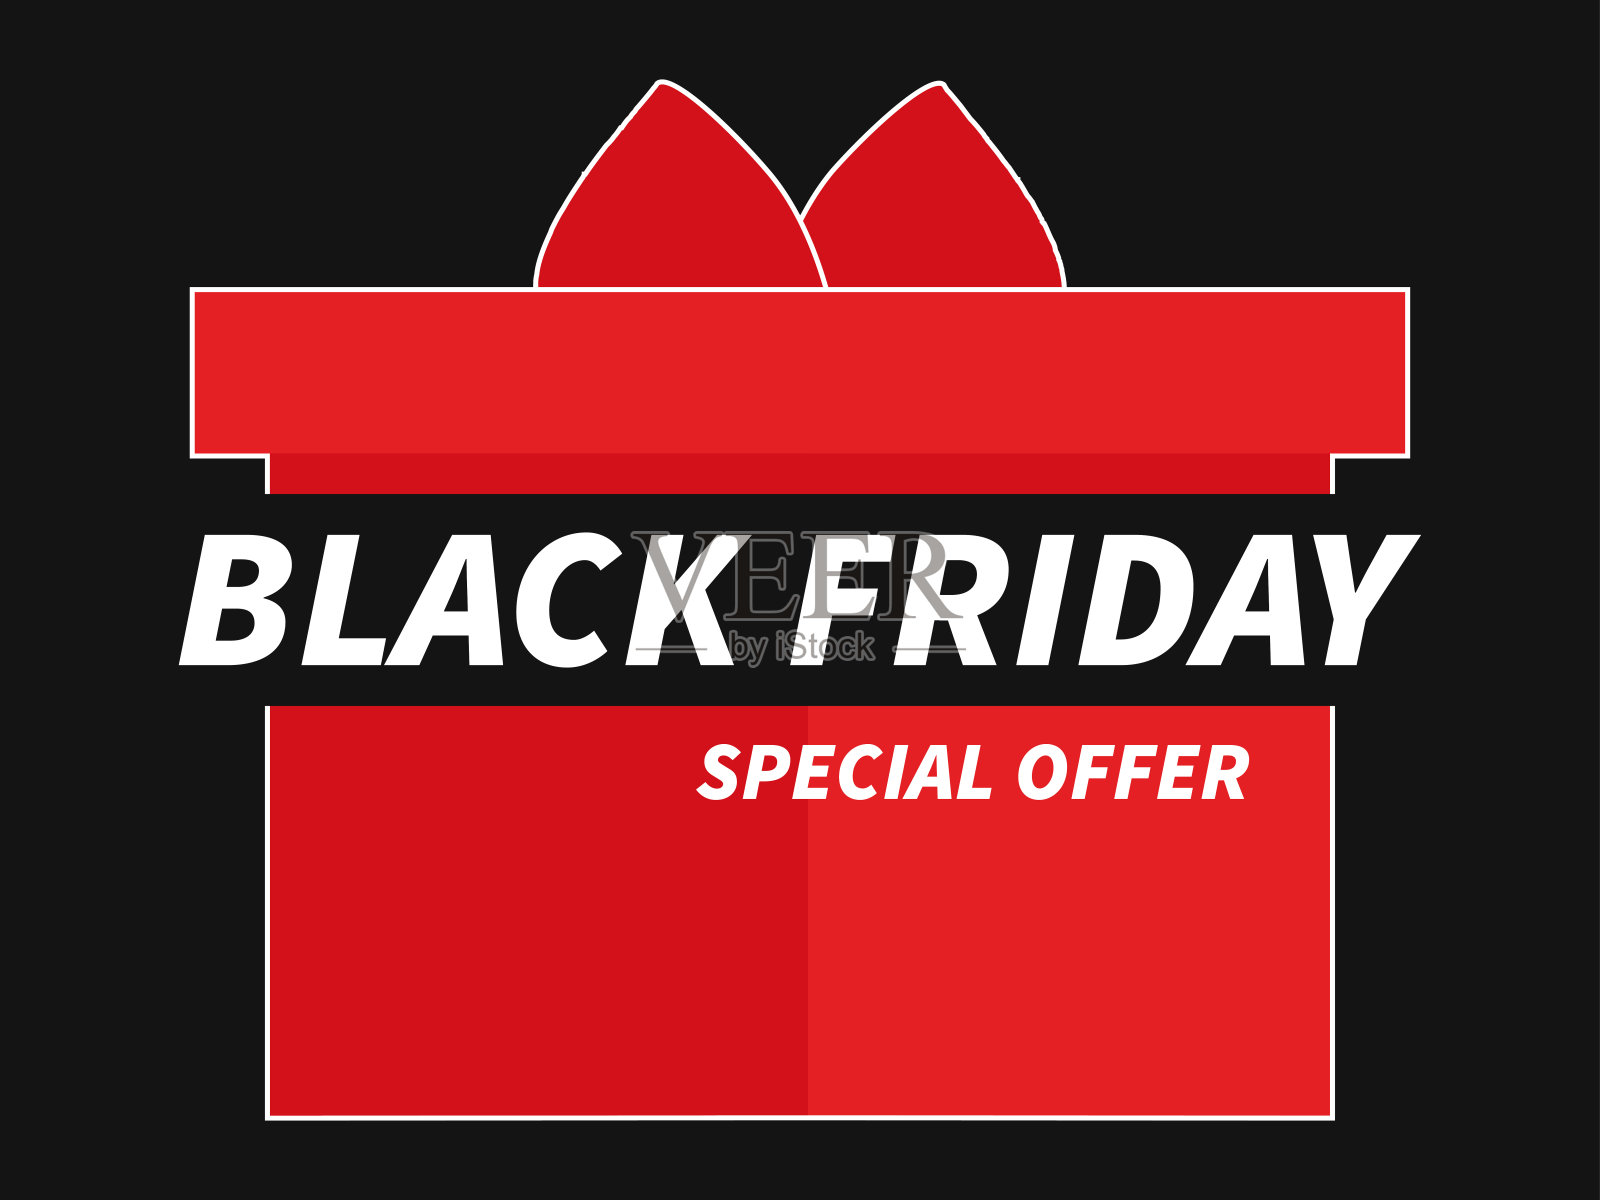 Black Friday special offer. Red gift box with bows on a black background. Design for promotional items, banner, flyers and gift cards. Vector illustration背景图片素材